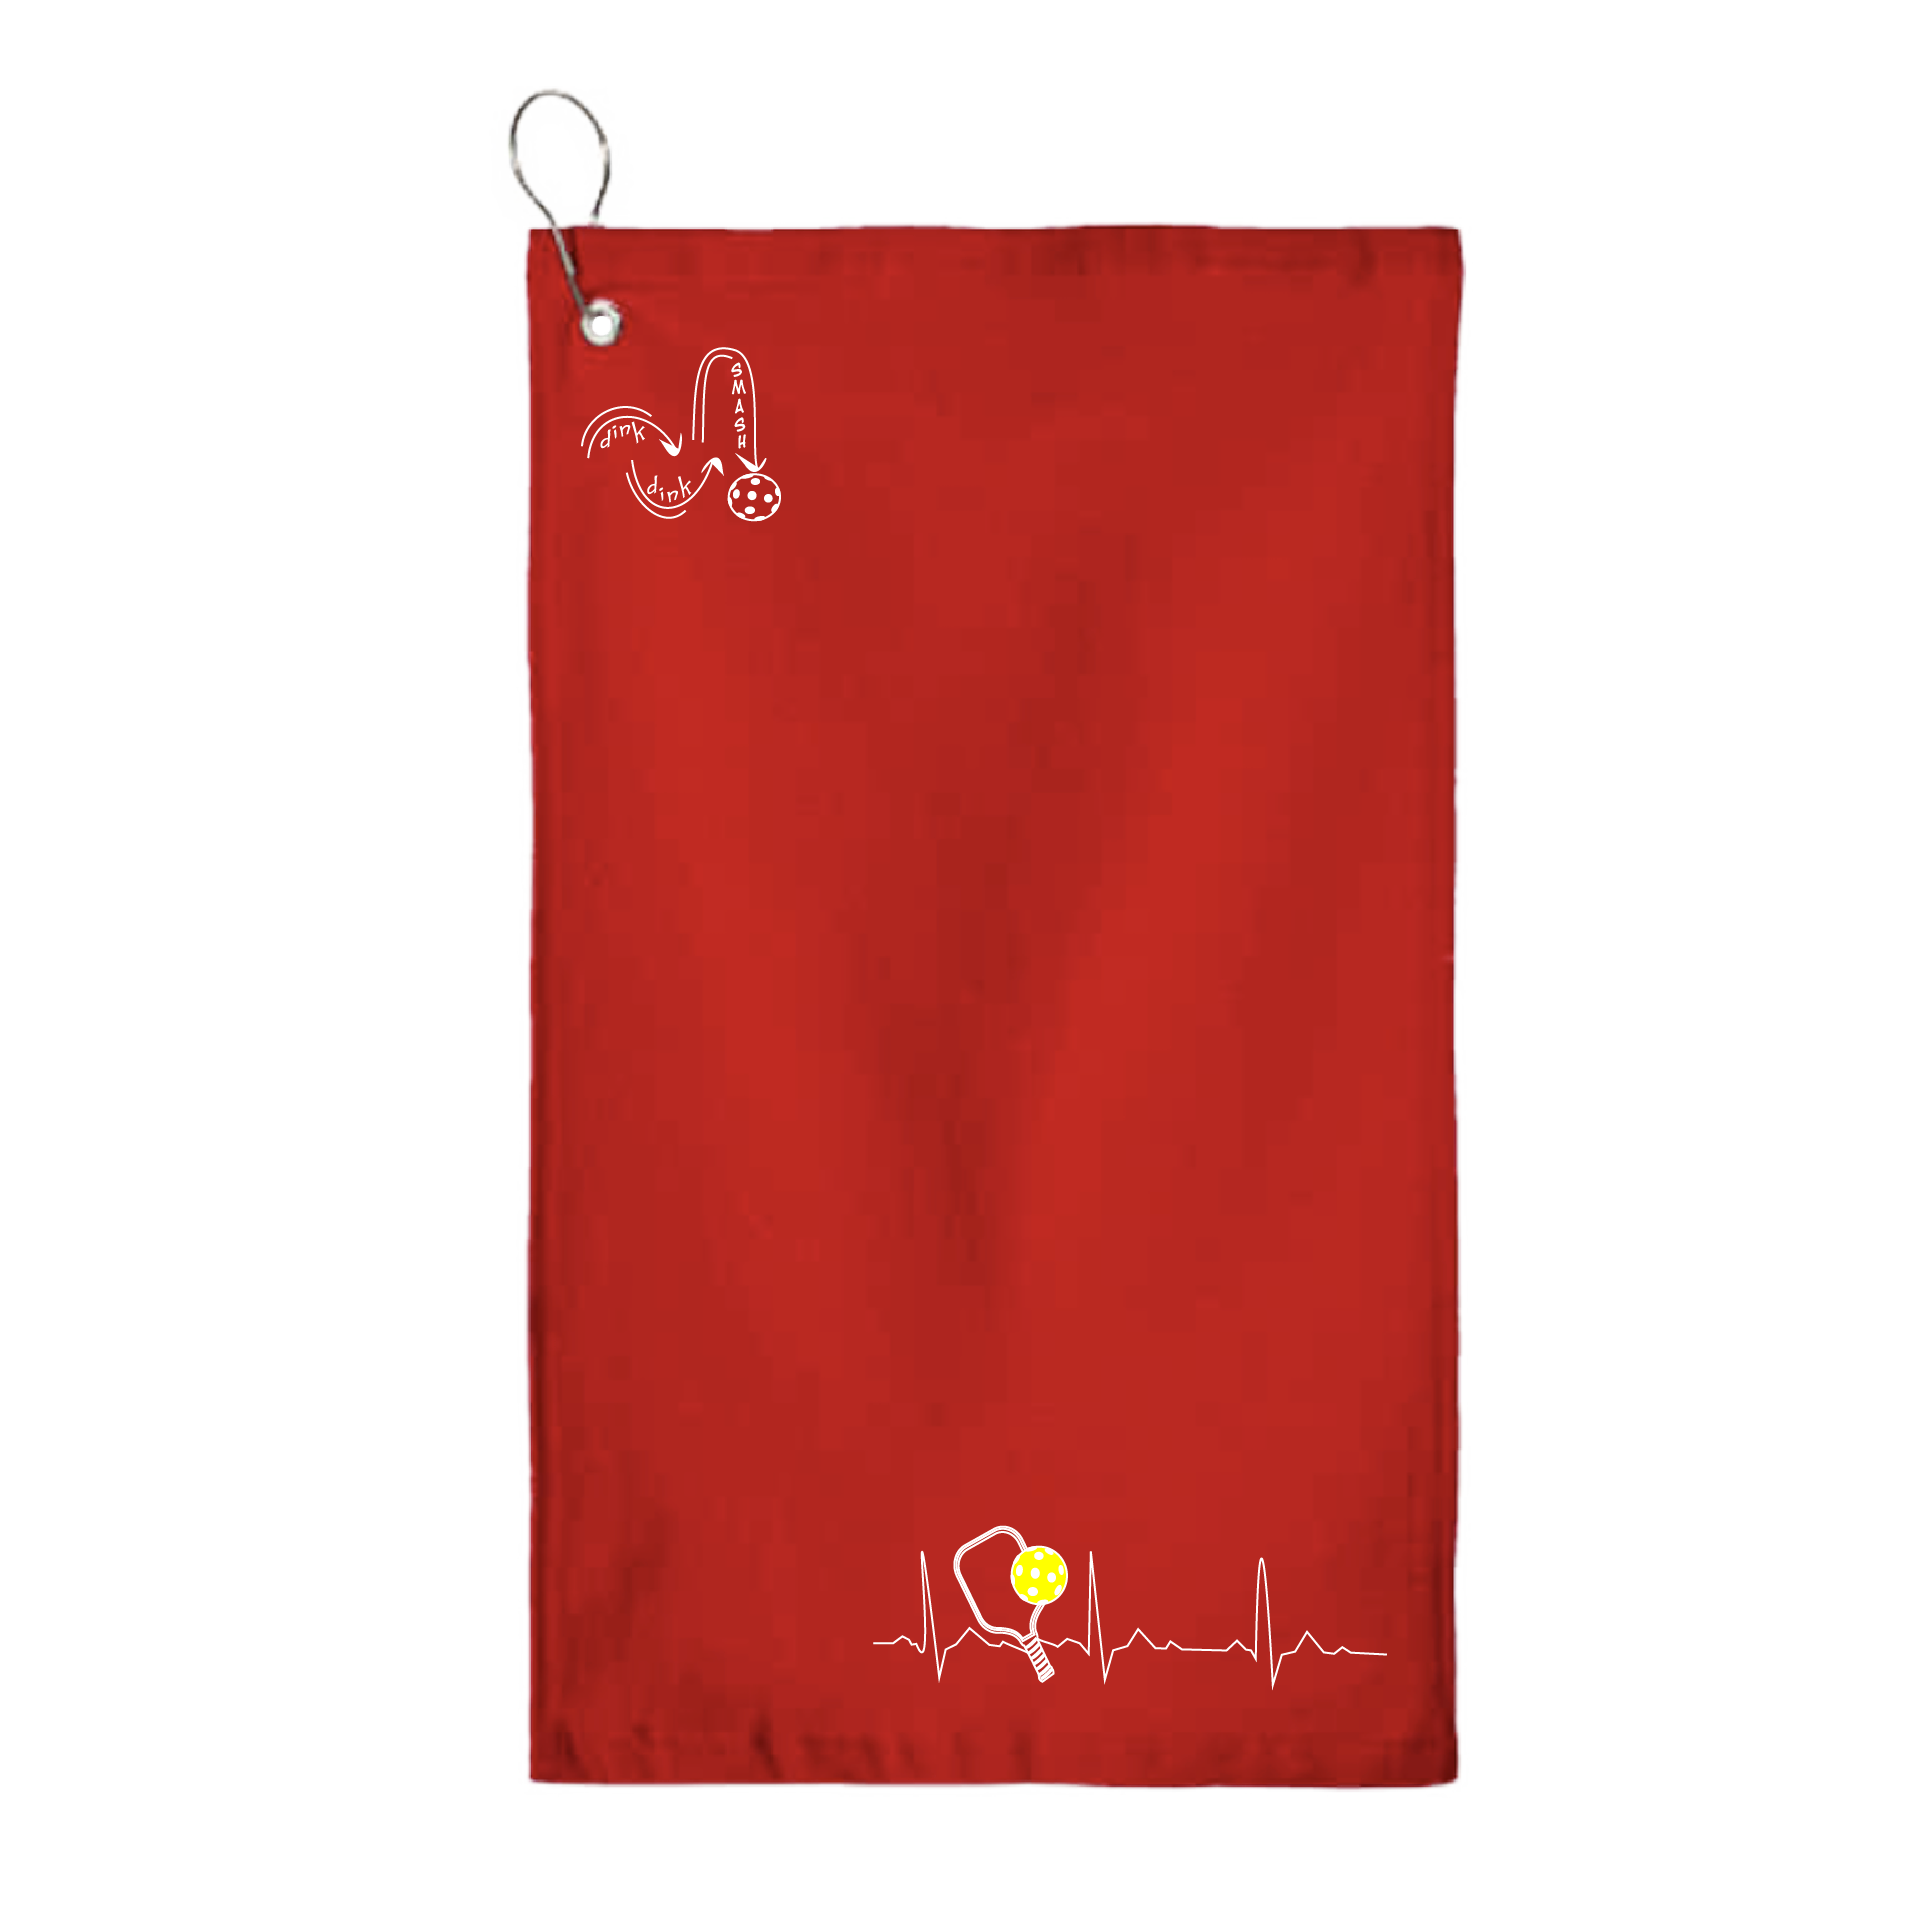 This Pickleball Heartbeat towel is crafted with cotton terry velour for optimal performance. It features grommets, hooks, and hemmed edges for added durability. It's perfect for completing your pickleball gear, and an ideal gift for friends and tournaments. The towel is designed to be both absorbent and lightweight, so you can remain dry and comfortable while you play.